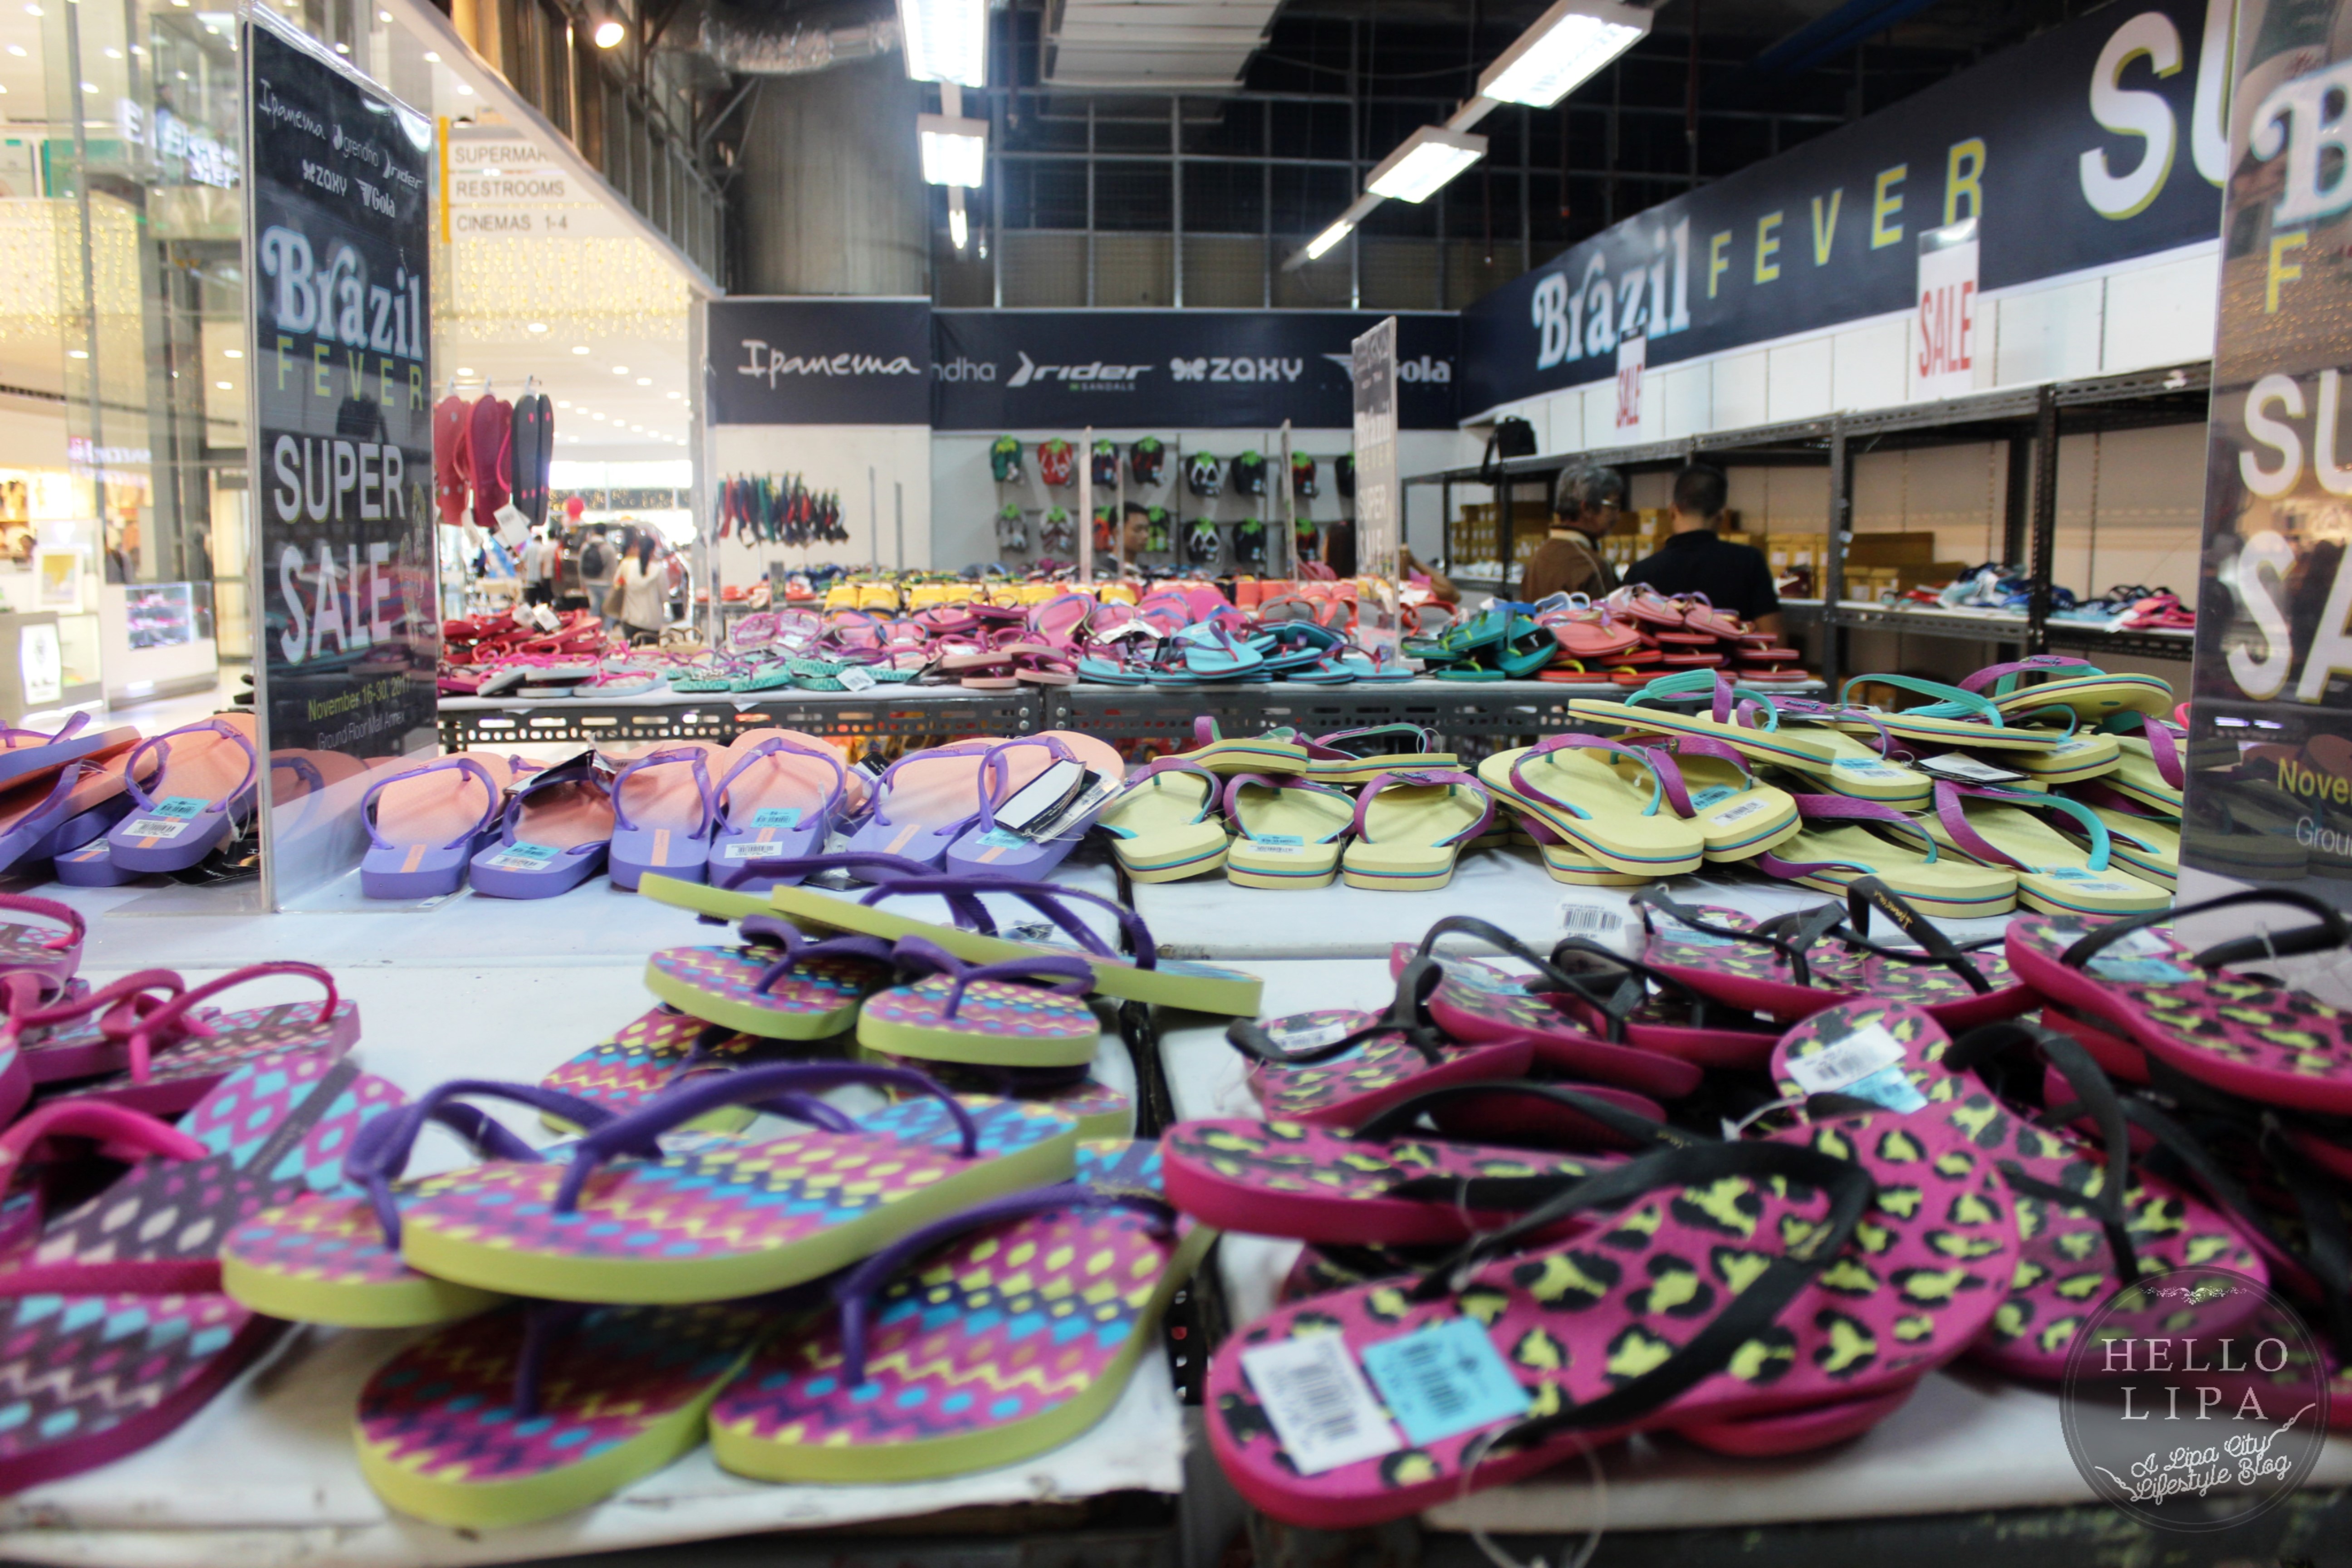 Trendy Slippers and Sandals Up to 50 Percent Off at The Brazil Fever Super Sale